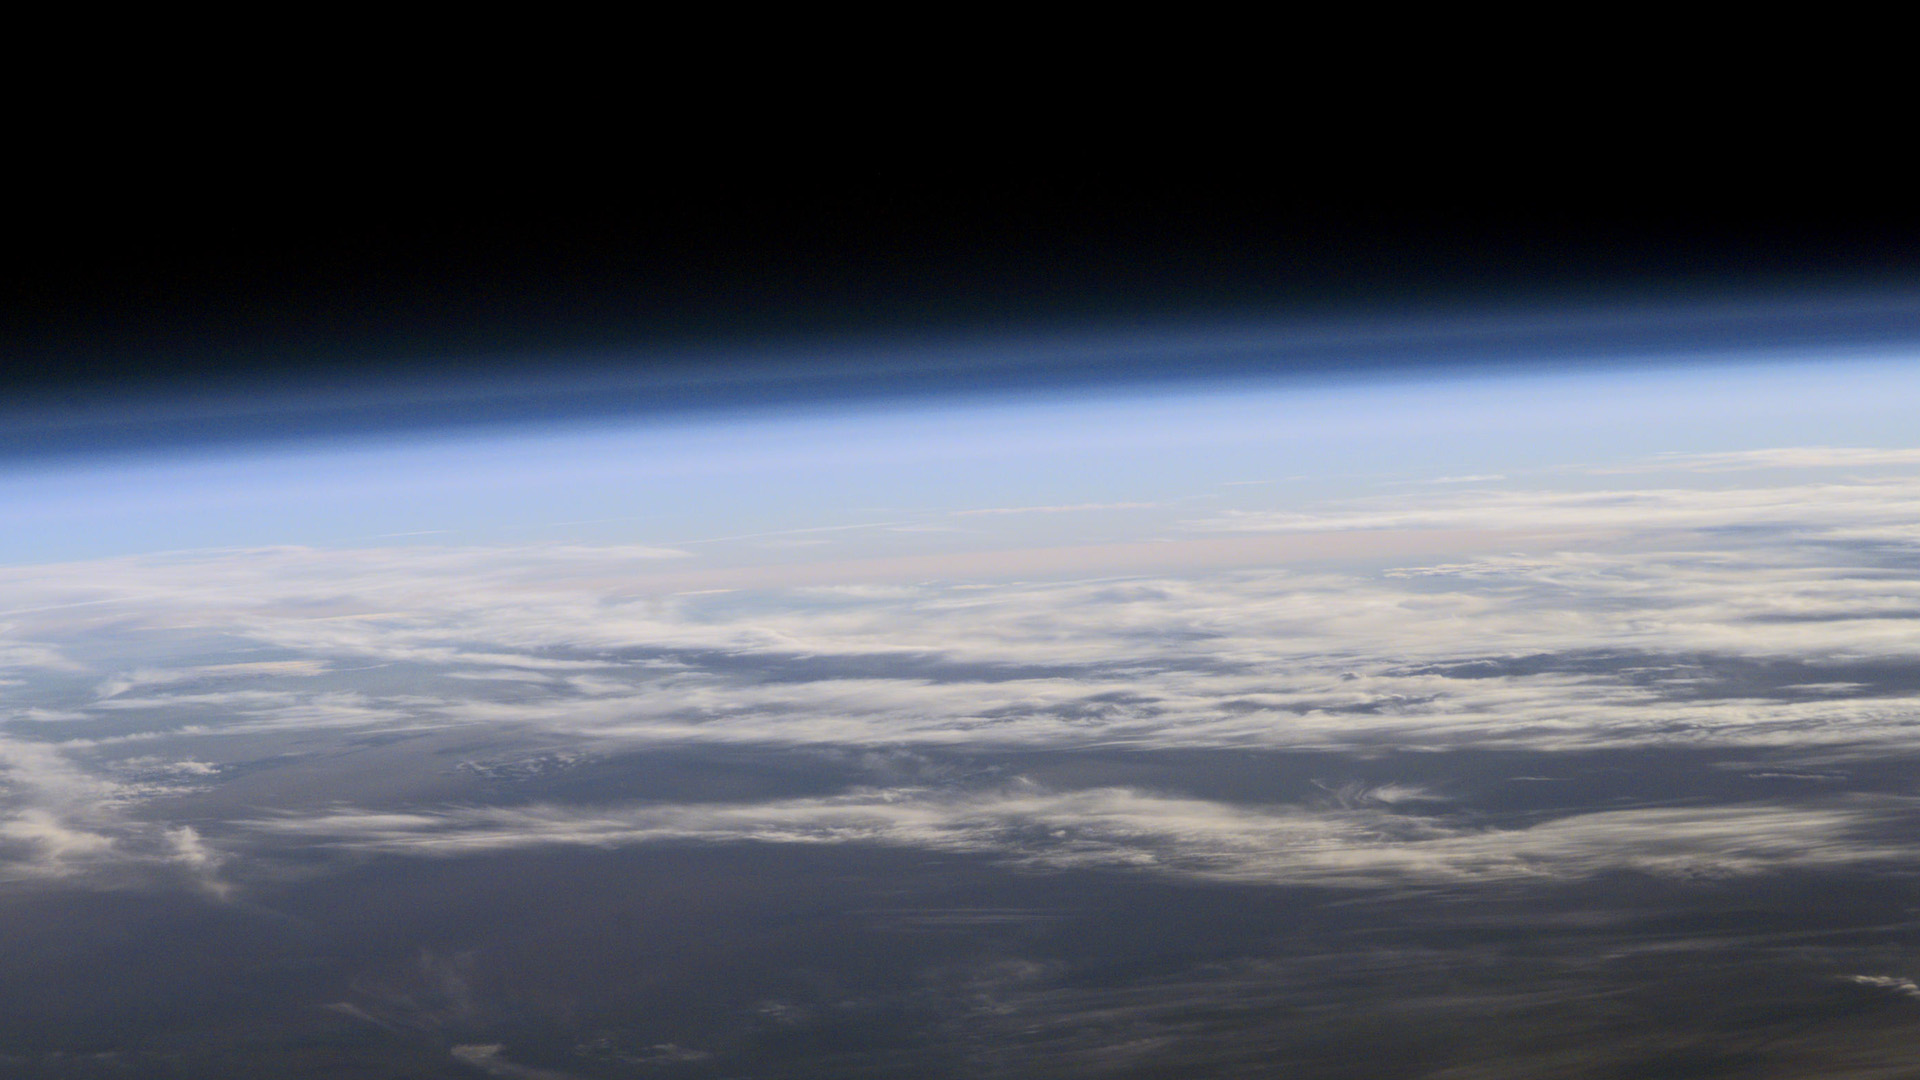 A view from space of Earth's atmosphere, looking out across the upper layer of the atmosphere into space. Faint, partly transparent blue and pink gradients are visible above the cloud line.